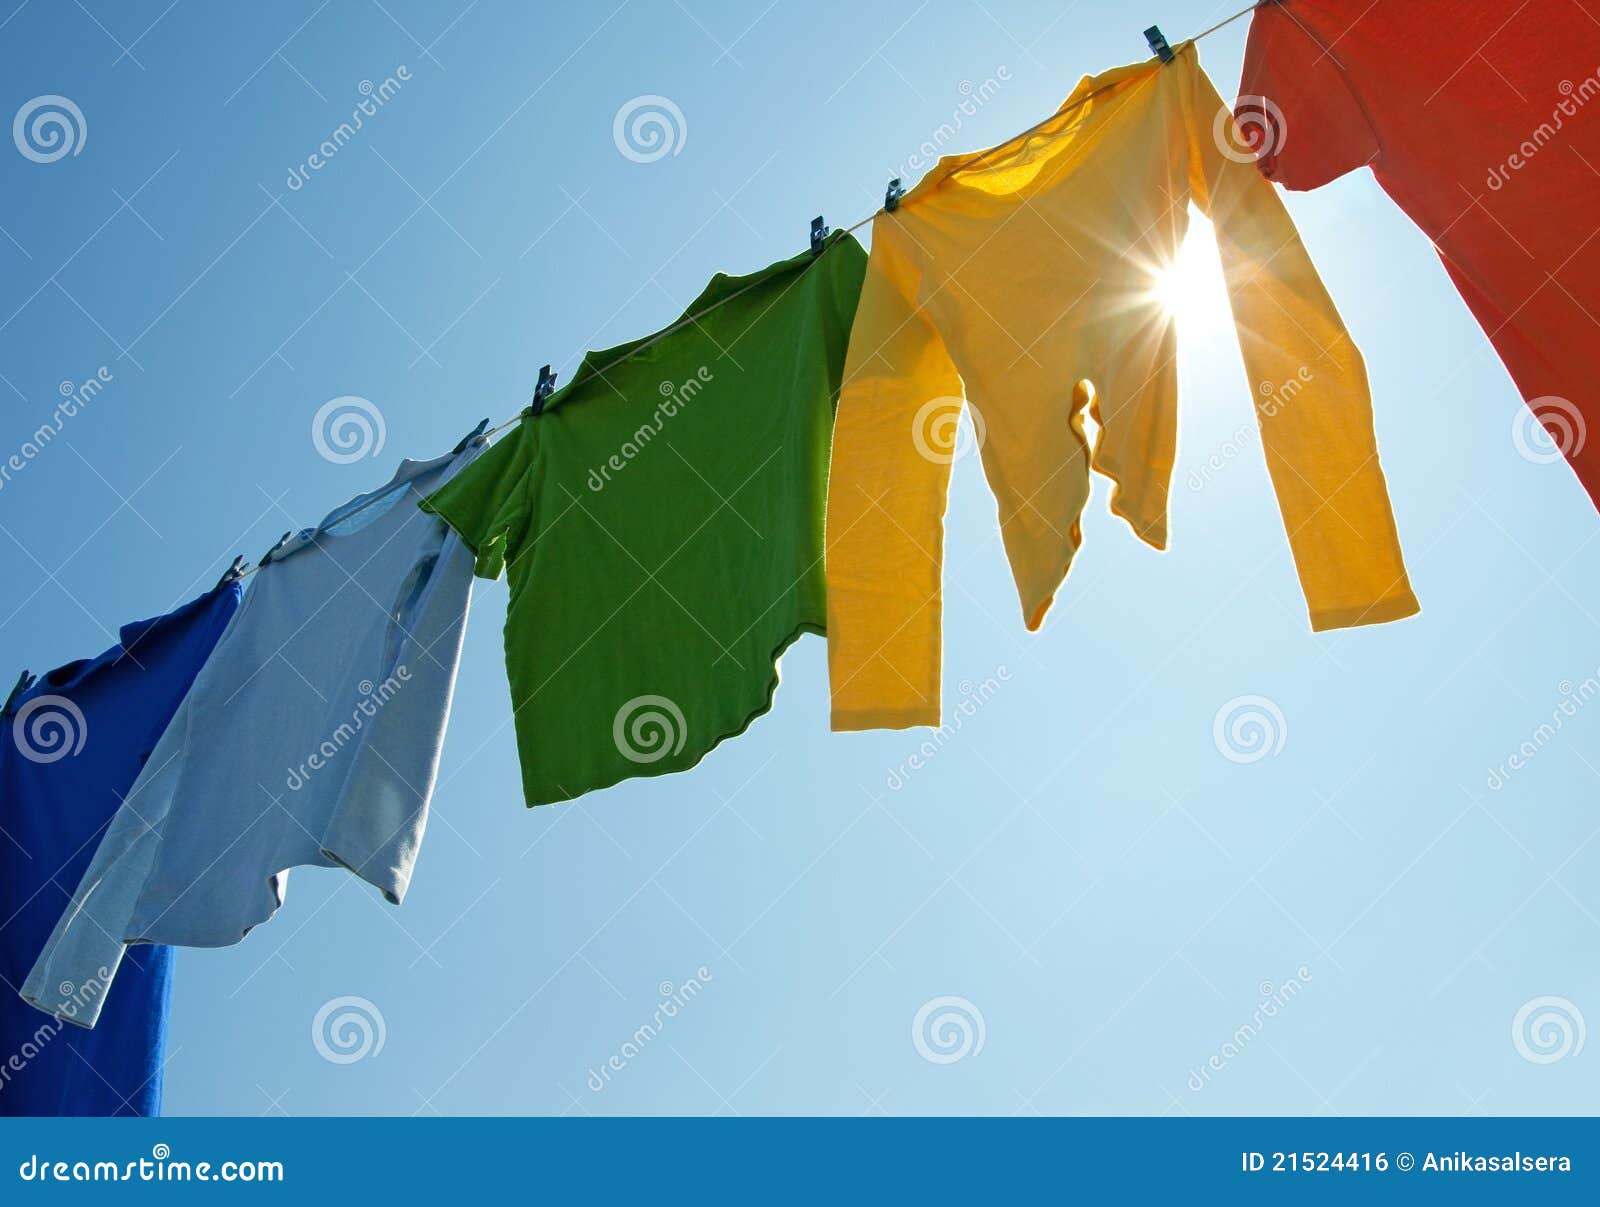 colorful clothes on a laundry line and sun shining